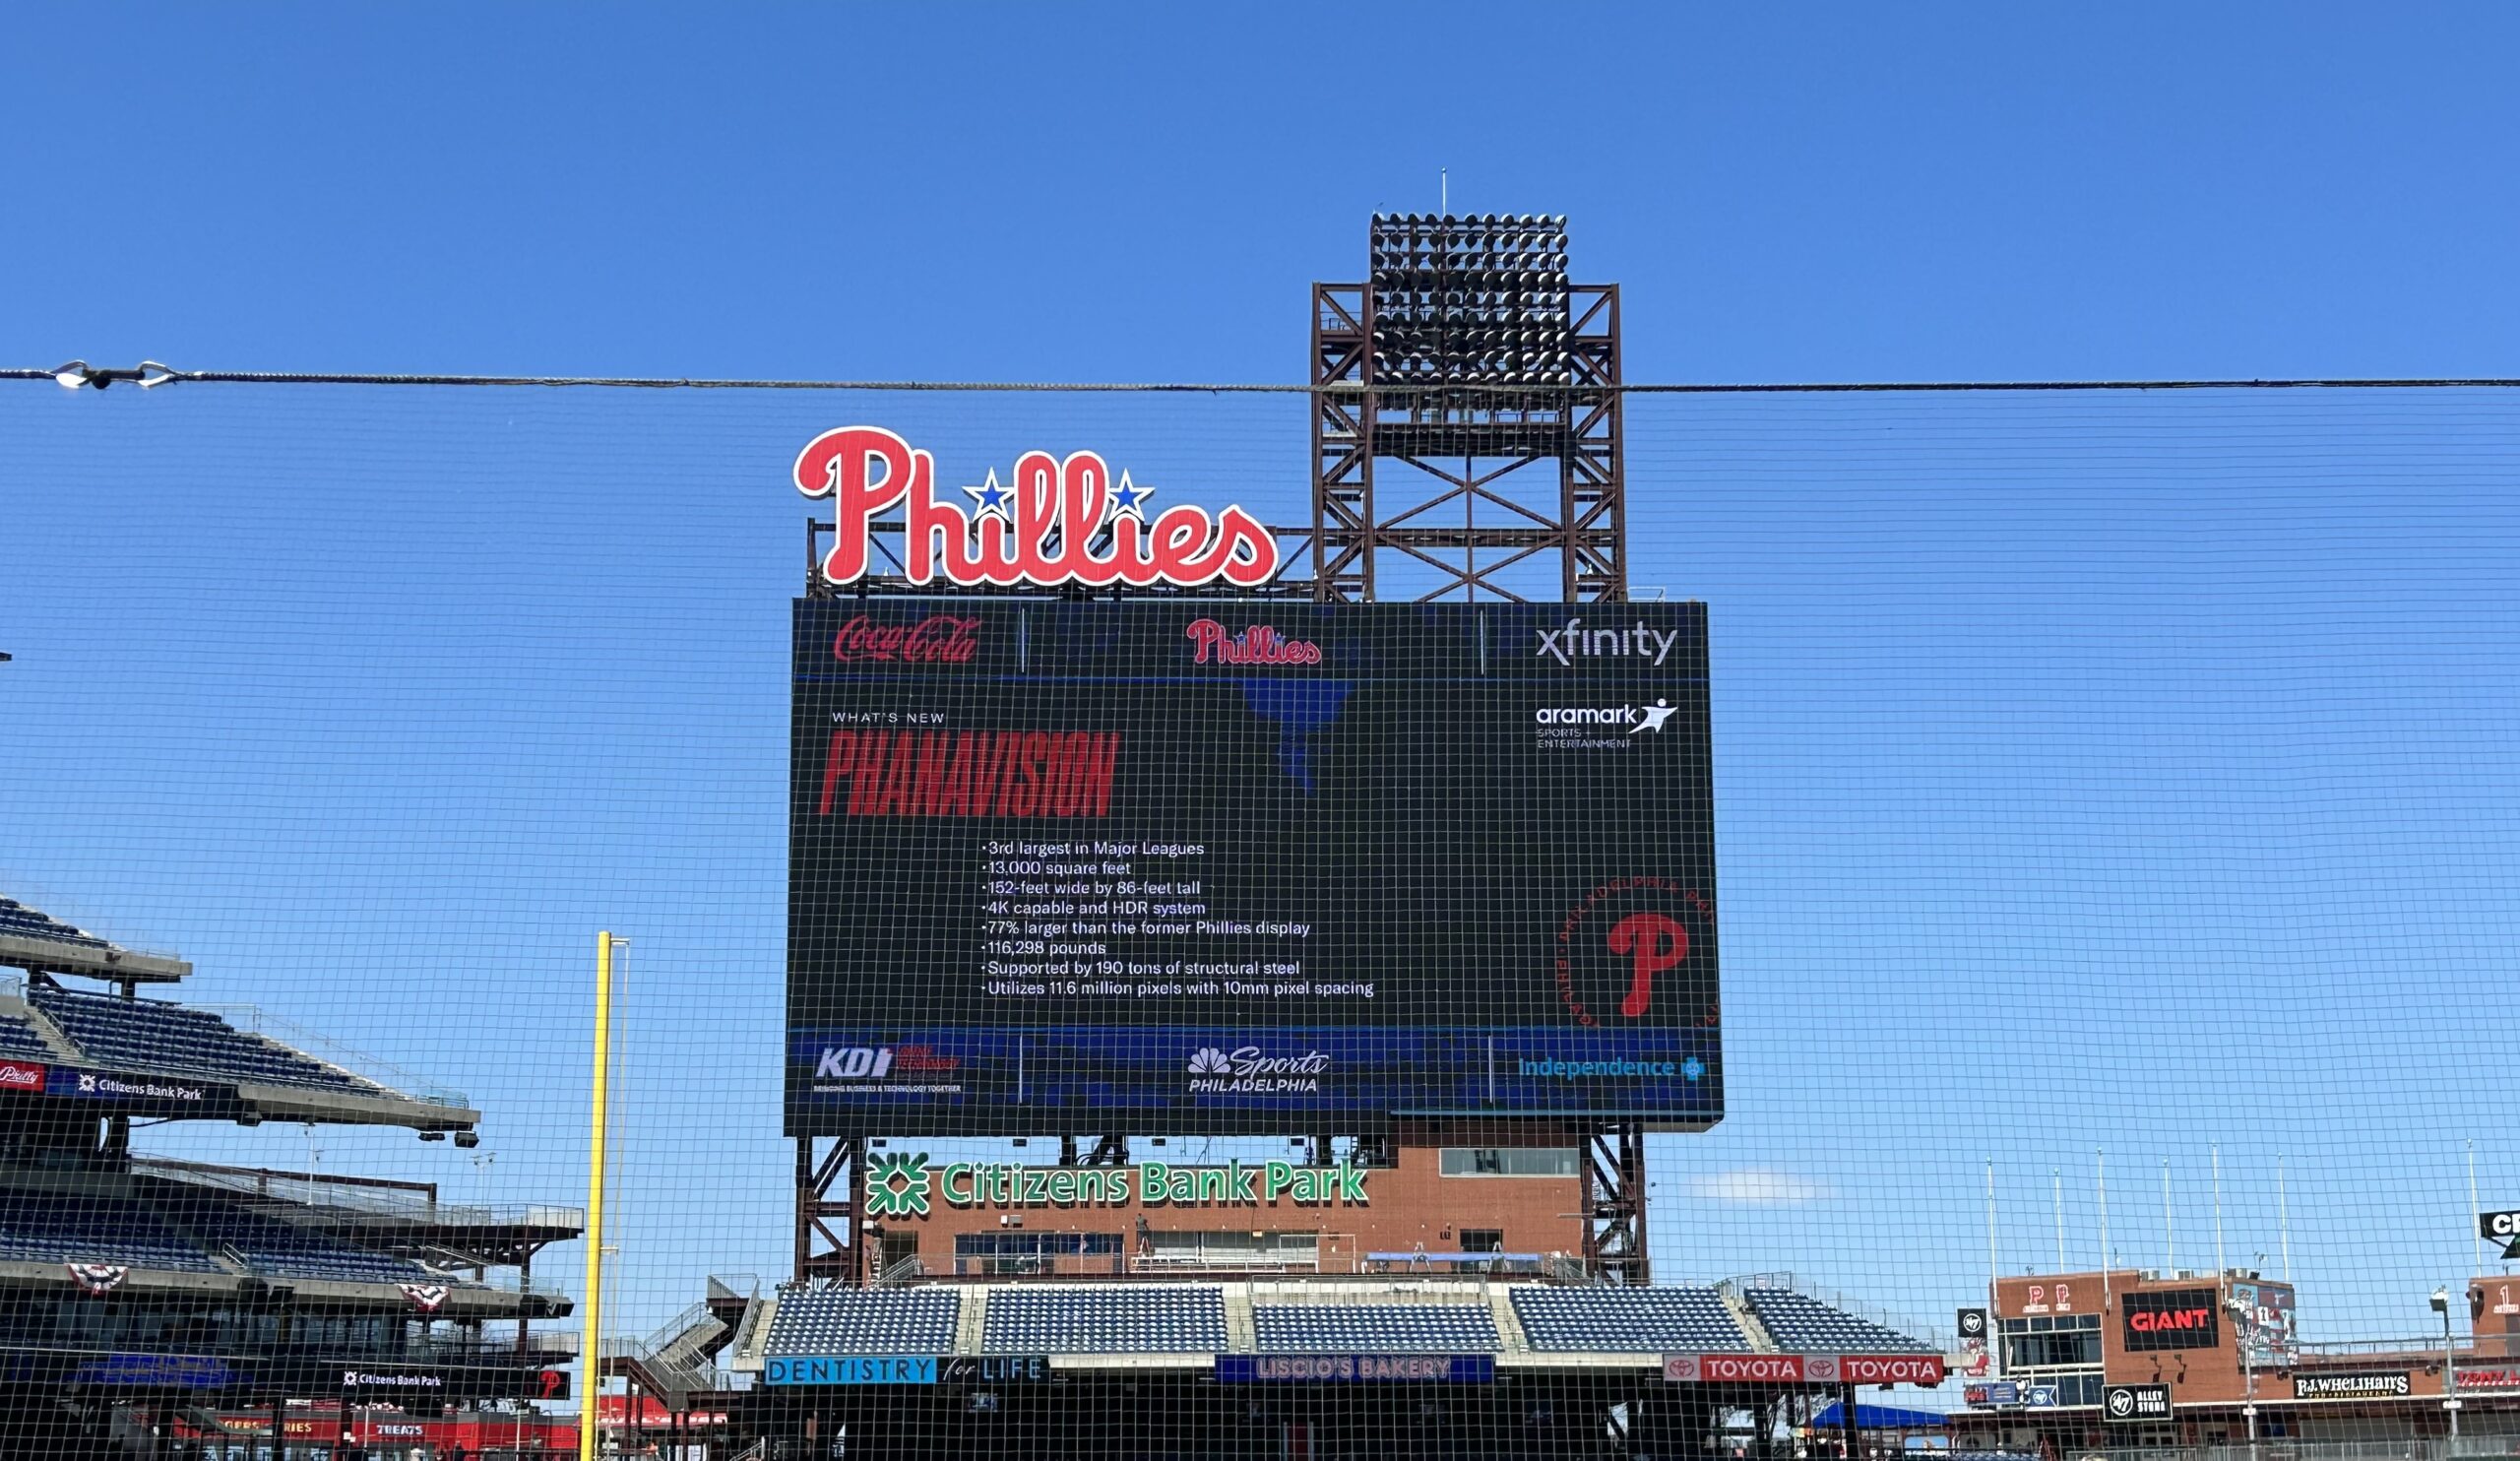 First Look: New scoreboard at Citizens Bank Park unveiled